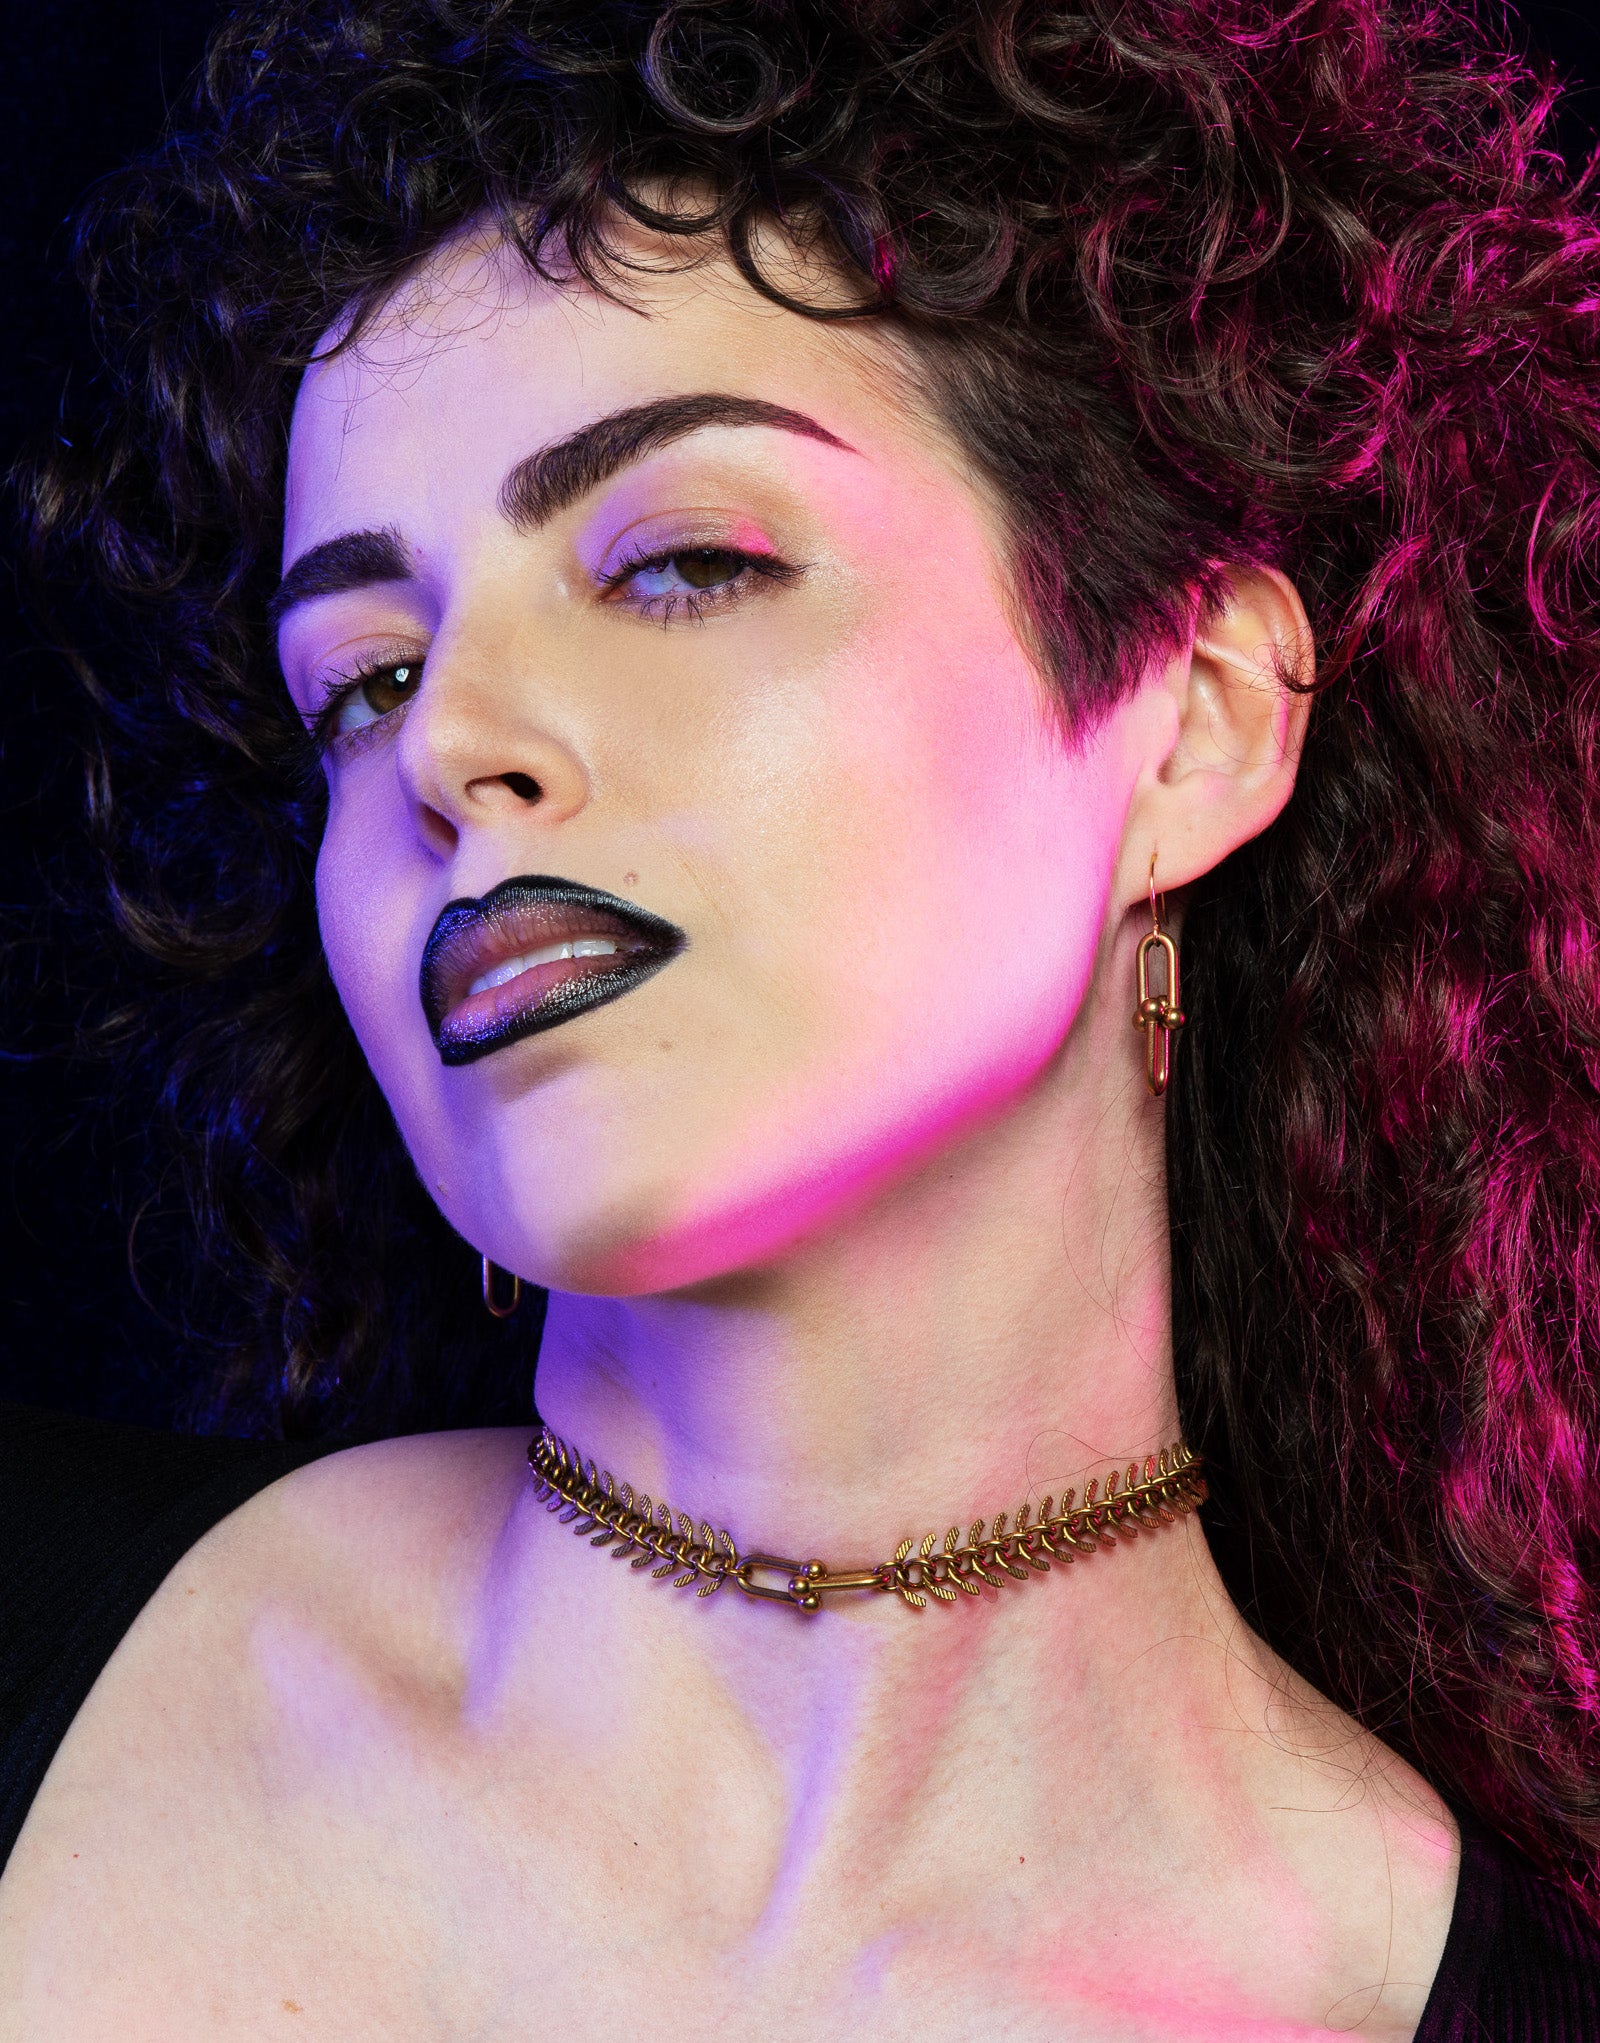 Model wearing fishbone choker with hardware chain link pendant and hardware earrings